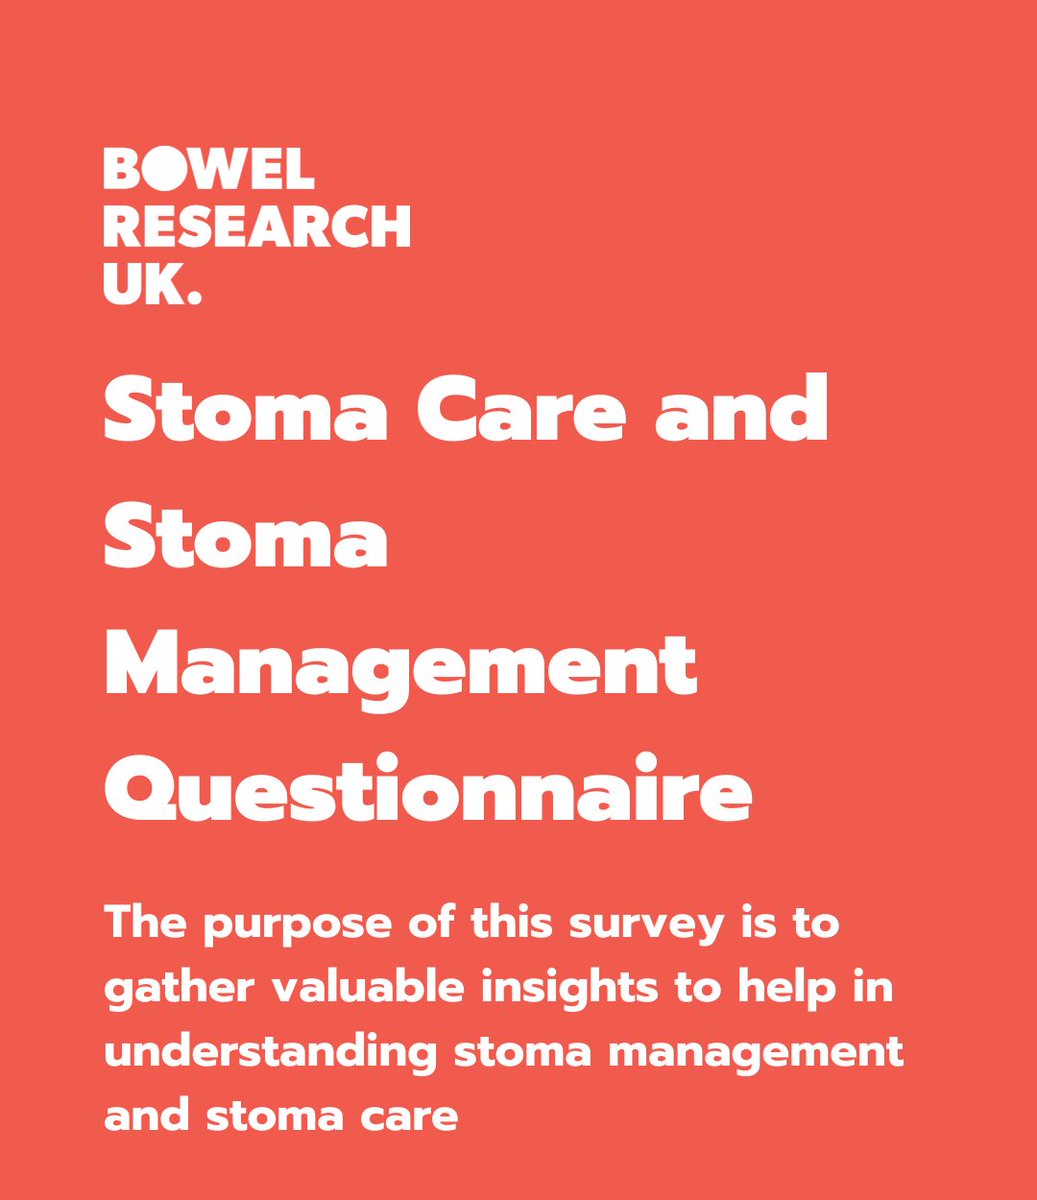 Researchers at King's College London are looking for people with a stoma to fill out a questionnaire as part of a PhD research study: forms.office.com/pages/response…

#BowelResearch #StomaCare #StomaManagement #StomaAwareness #Stoma #StomaBag #Bowels #BowelDisease #PPI